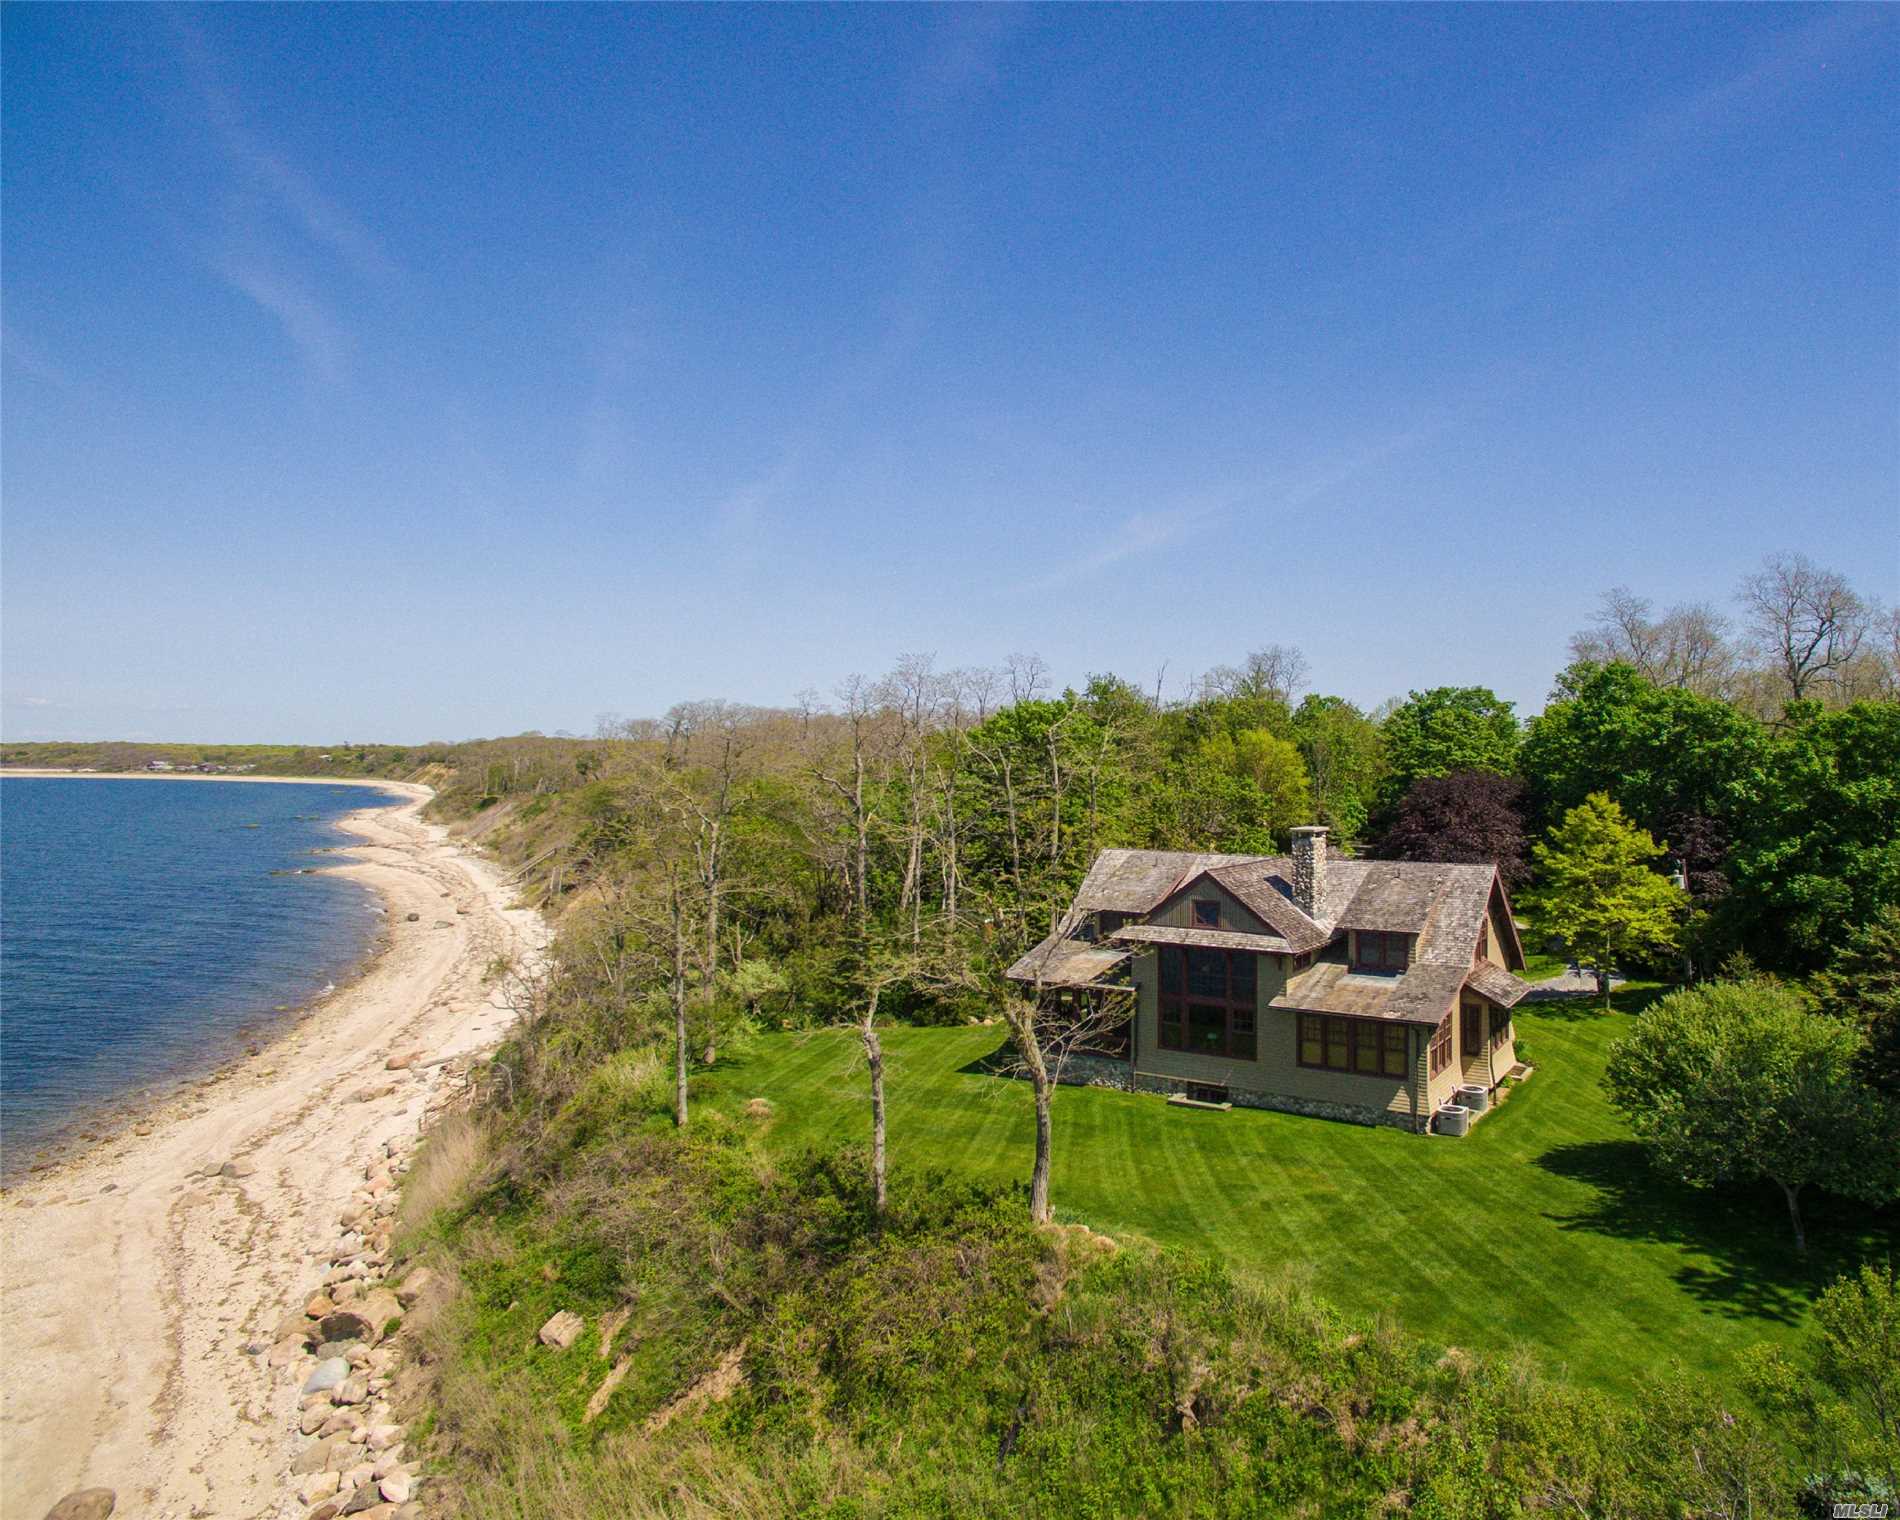 A 6600-Foot Drive Down A Narrow Lane Leads Through Woods And Vineyards To This Handsome Shingle-Style Home, Set On An Extraordinarily-Private 2.5-Acre Waterfront Estate With 340 Feet Of Low-Bluff Frontage On Long Island Sound. Completed In 2009, The Residence Is Amenity-Rich And Exquisitely Crafted. Come Home And Live Graciously.